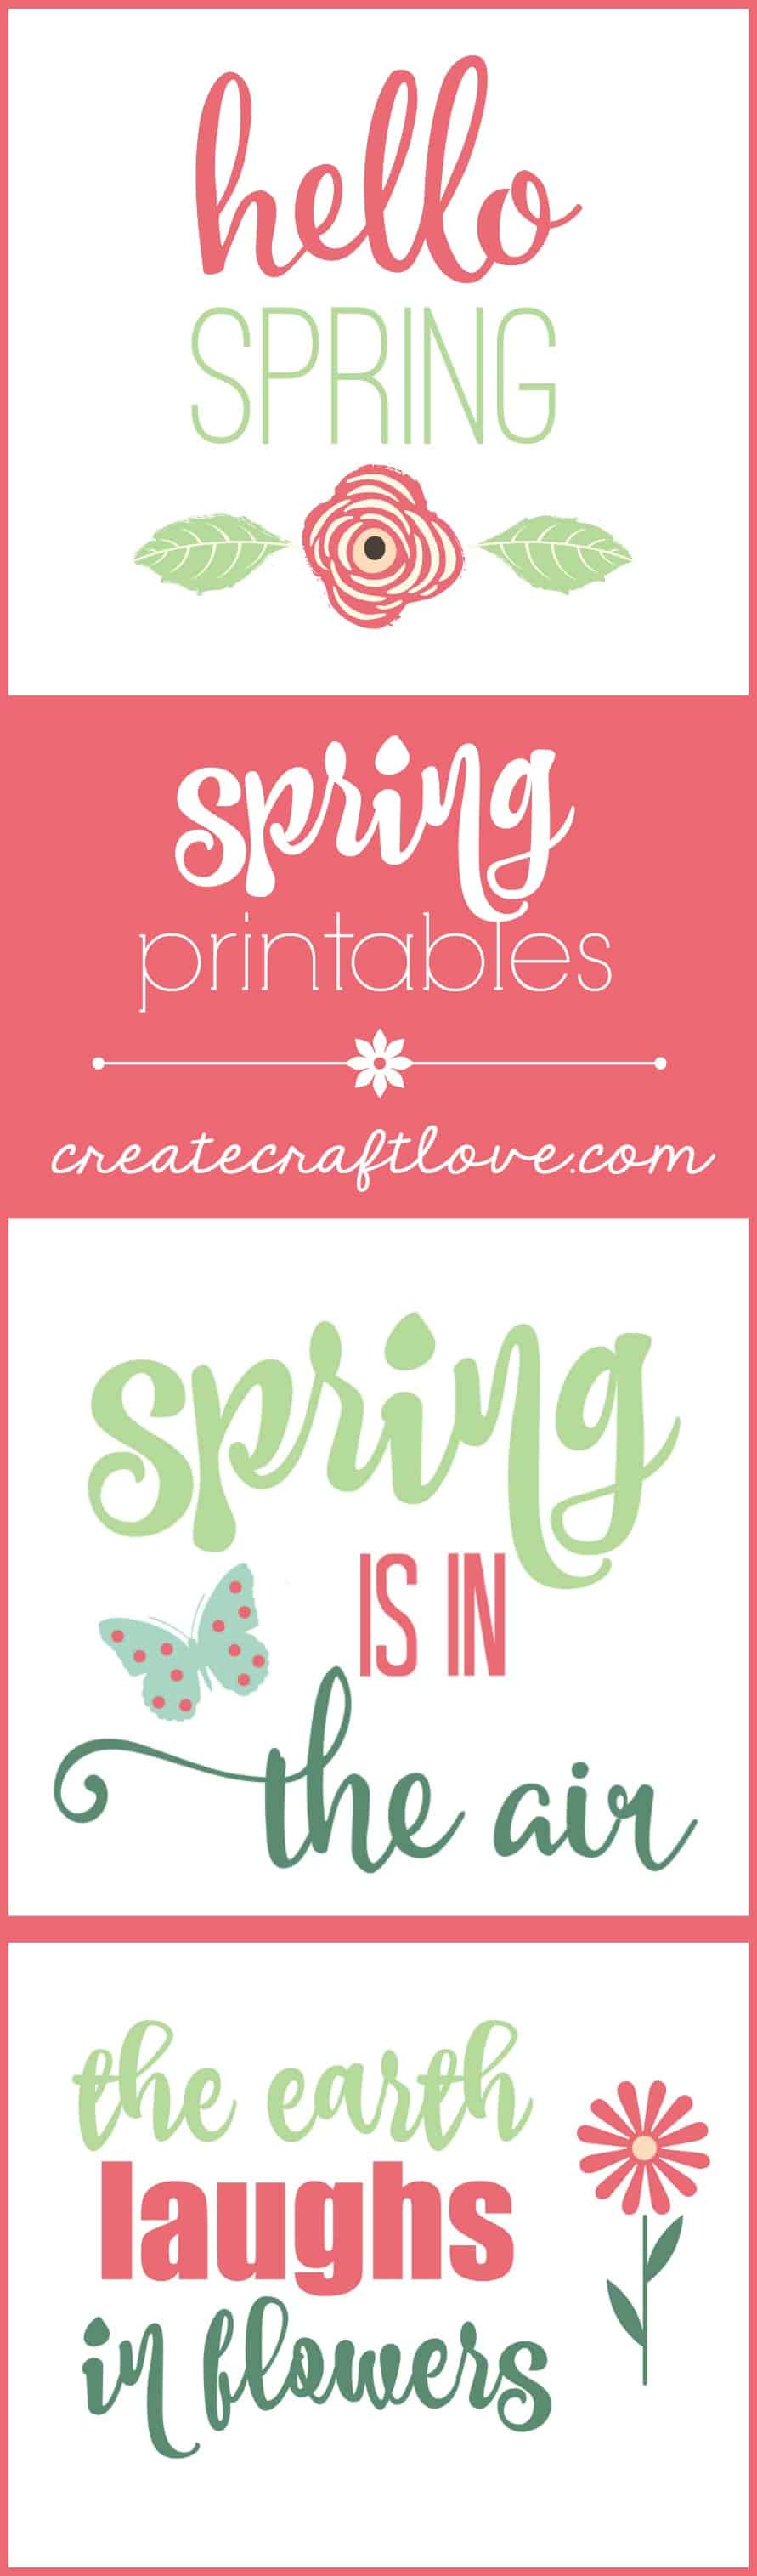 15 Cute Free Spring Printables- These spring wall art prints are an easy (and inexpensive) way to get your home ready for spring! | spring decor, spring art prints, Easter decor, Easter art prints, #freePrintables #wallArt #spring #decor #ACultivatedNest